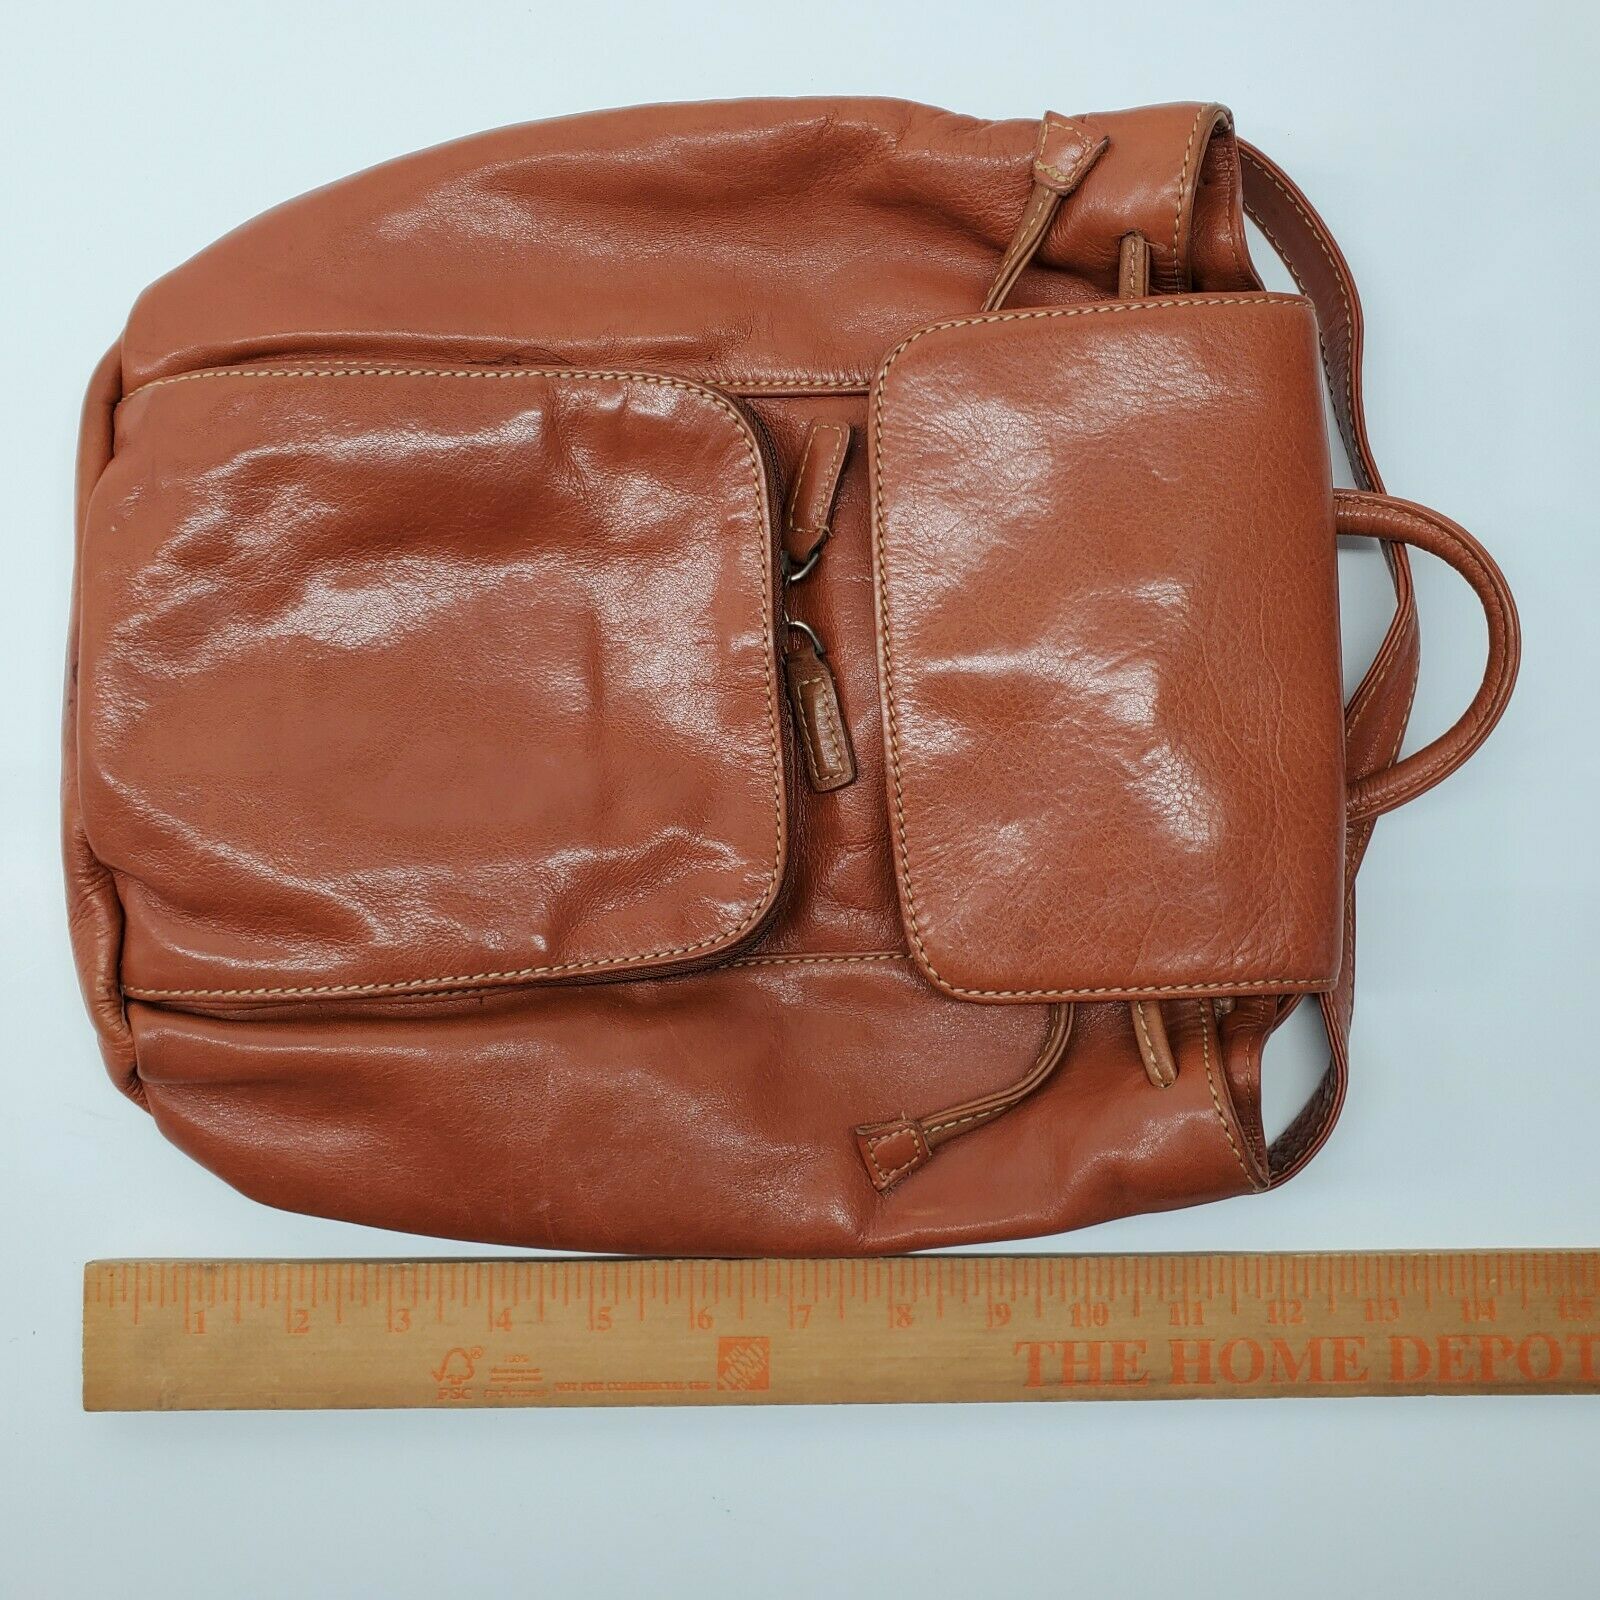 Vintage Tano Leather Backpack Bag Purse Made India Camel Brown ...